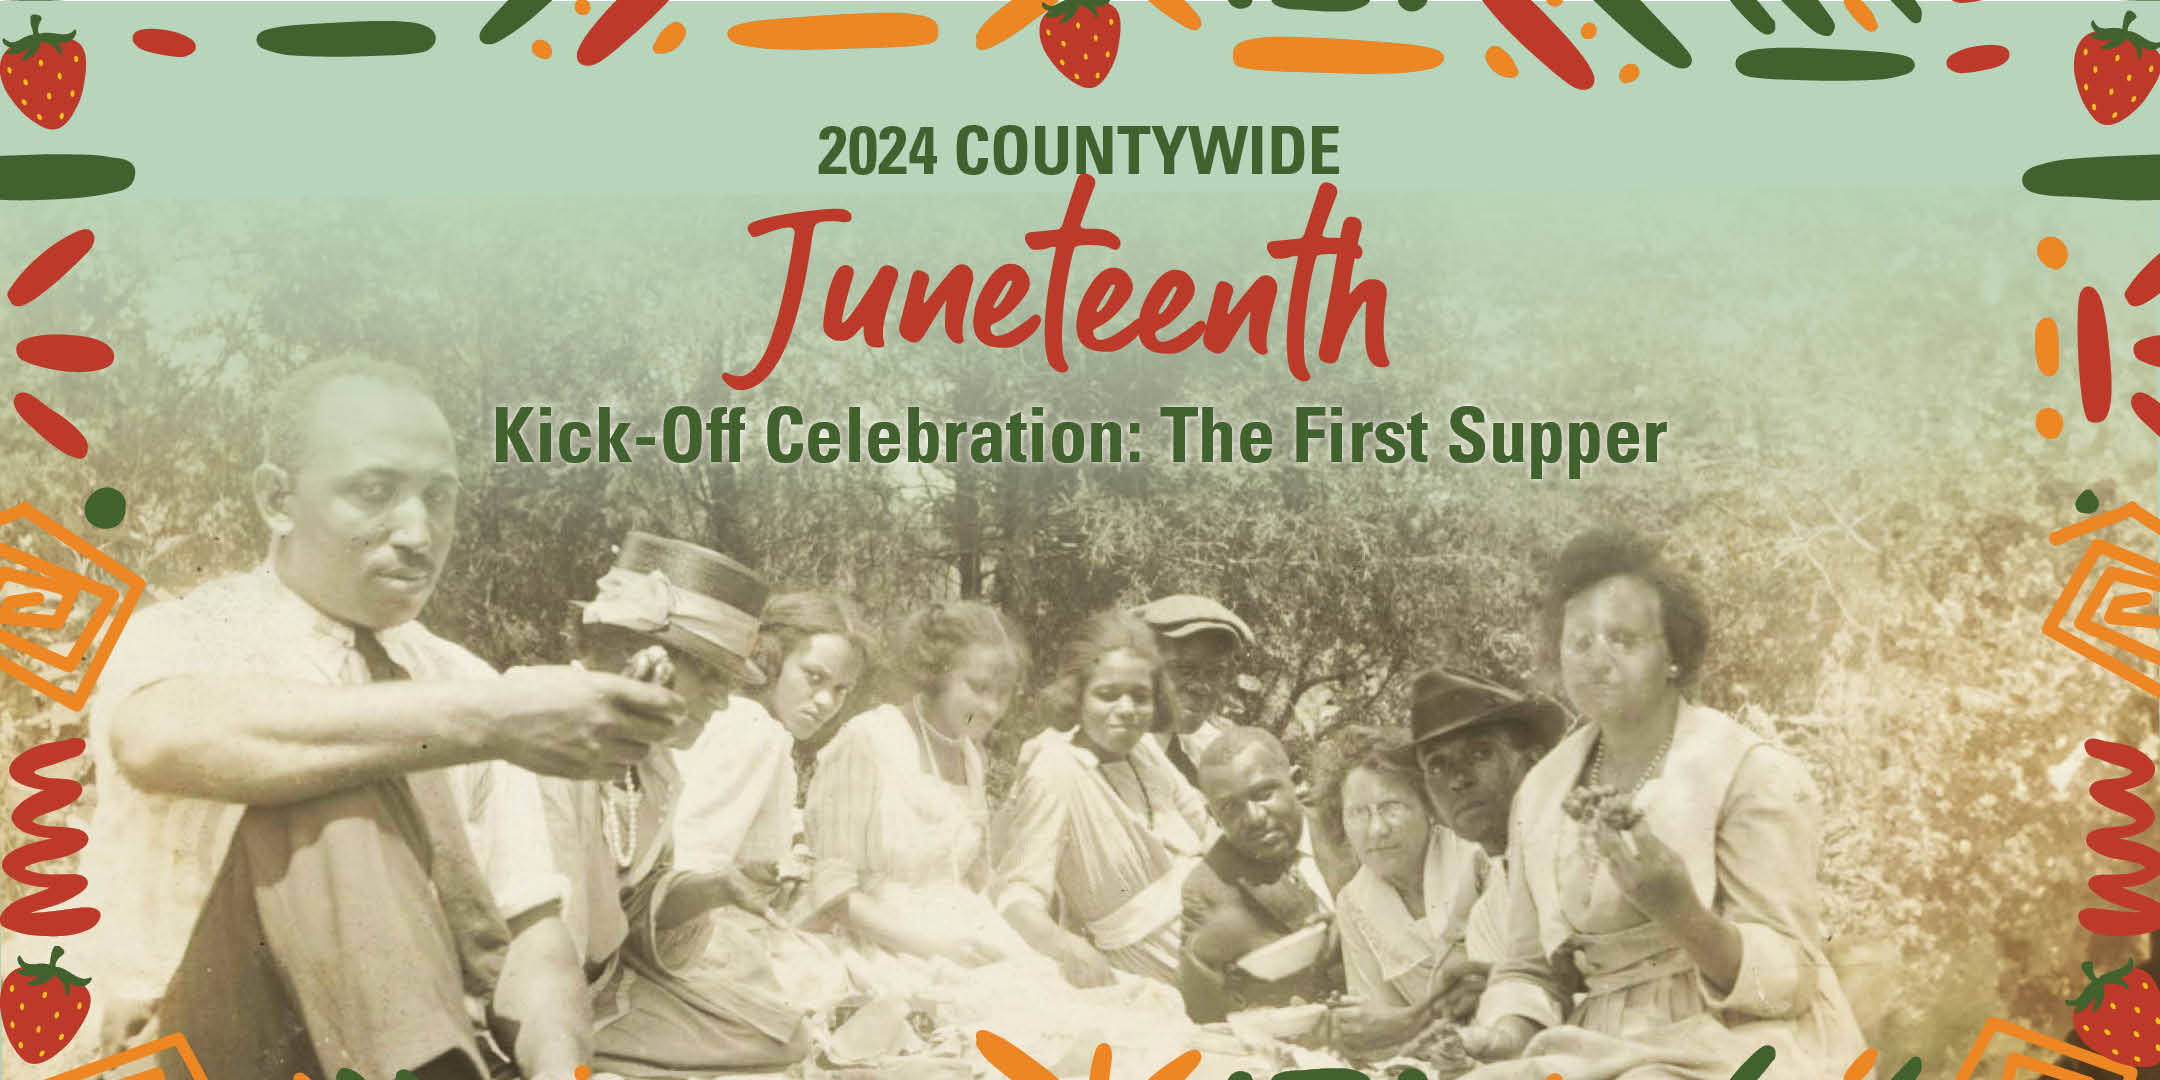 2024 Countywide Juneteenth Kick-Off Celebration: The First Supper